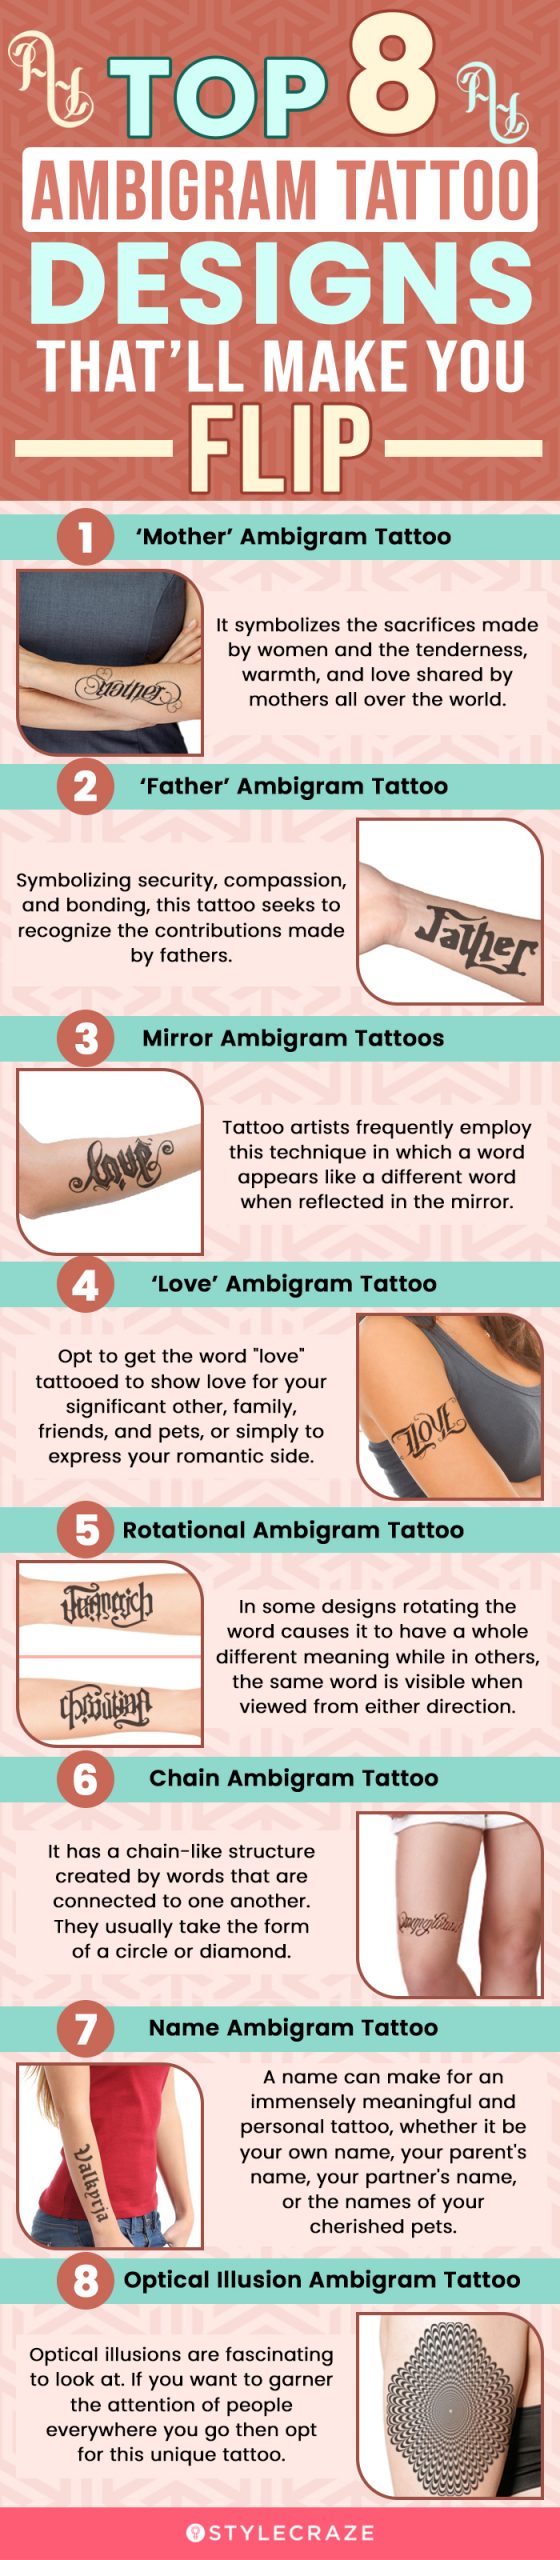 top 8 ambigram tattoo designs that’ll make you flip (infographic)